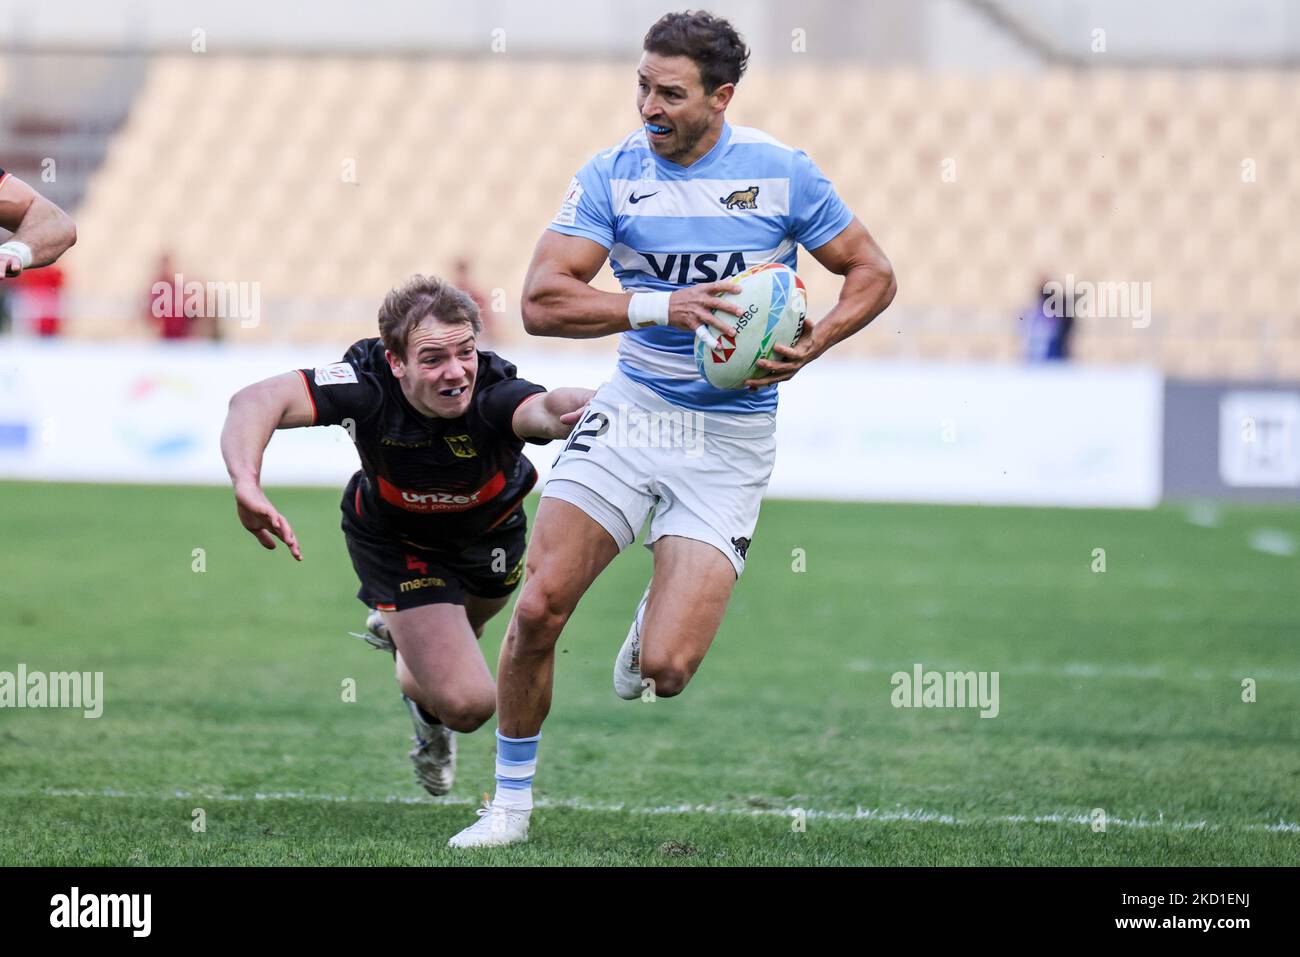 Franco Sabato of Argentina runs with the ball during the Men's HSBC World Rugby Sevens Series 2022 match between Argentina and Germany at the La Cartuja stadium in Seville, on January 29, 2022. (Photo by DAX Images/NurPhoto) Stock Photo